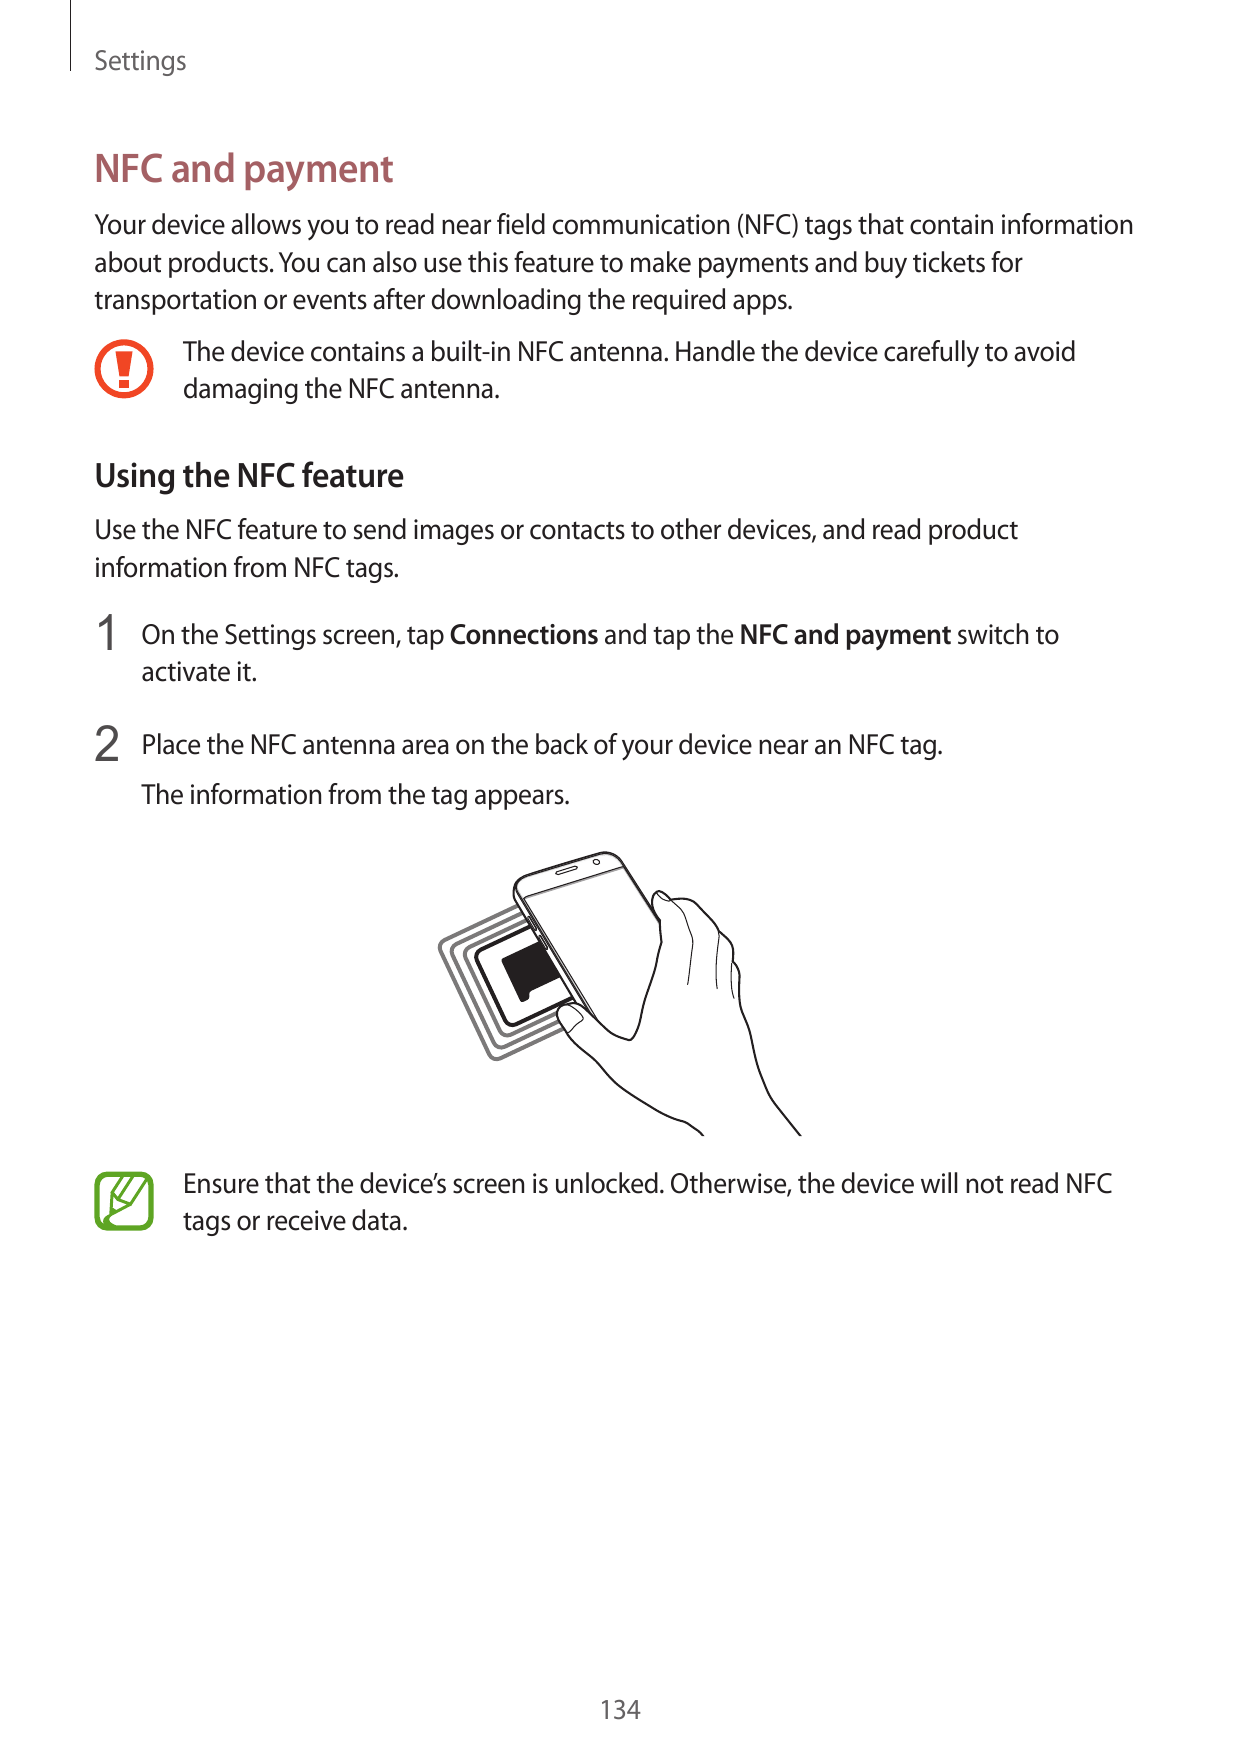 SettingsNFC and paymentYour device allows you to read near field communication (NFC) tags that contain informationabout products